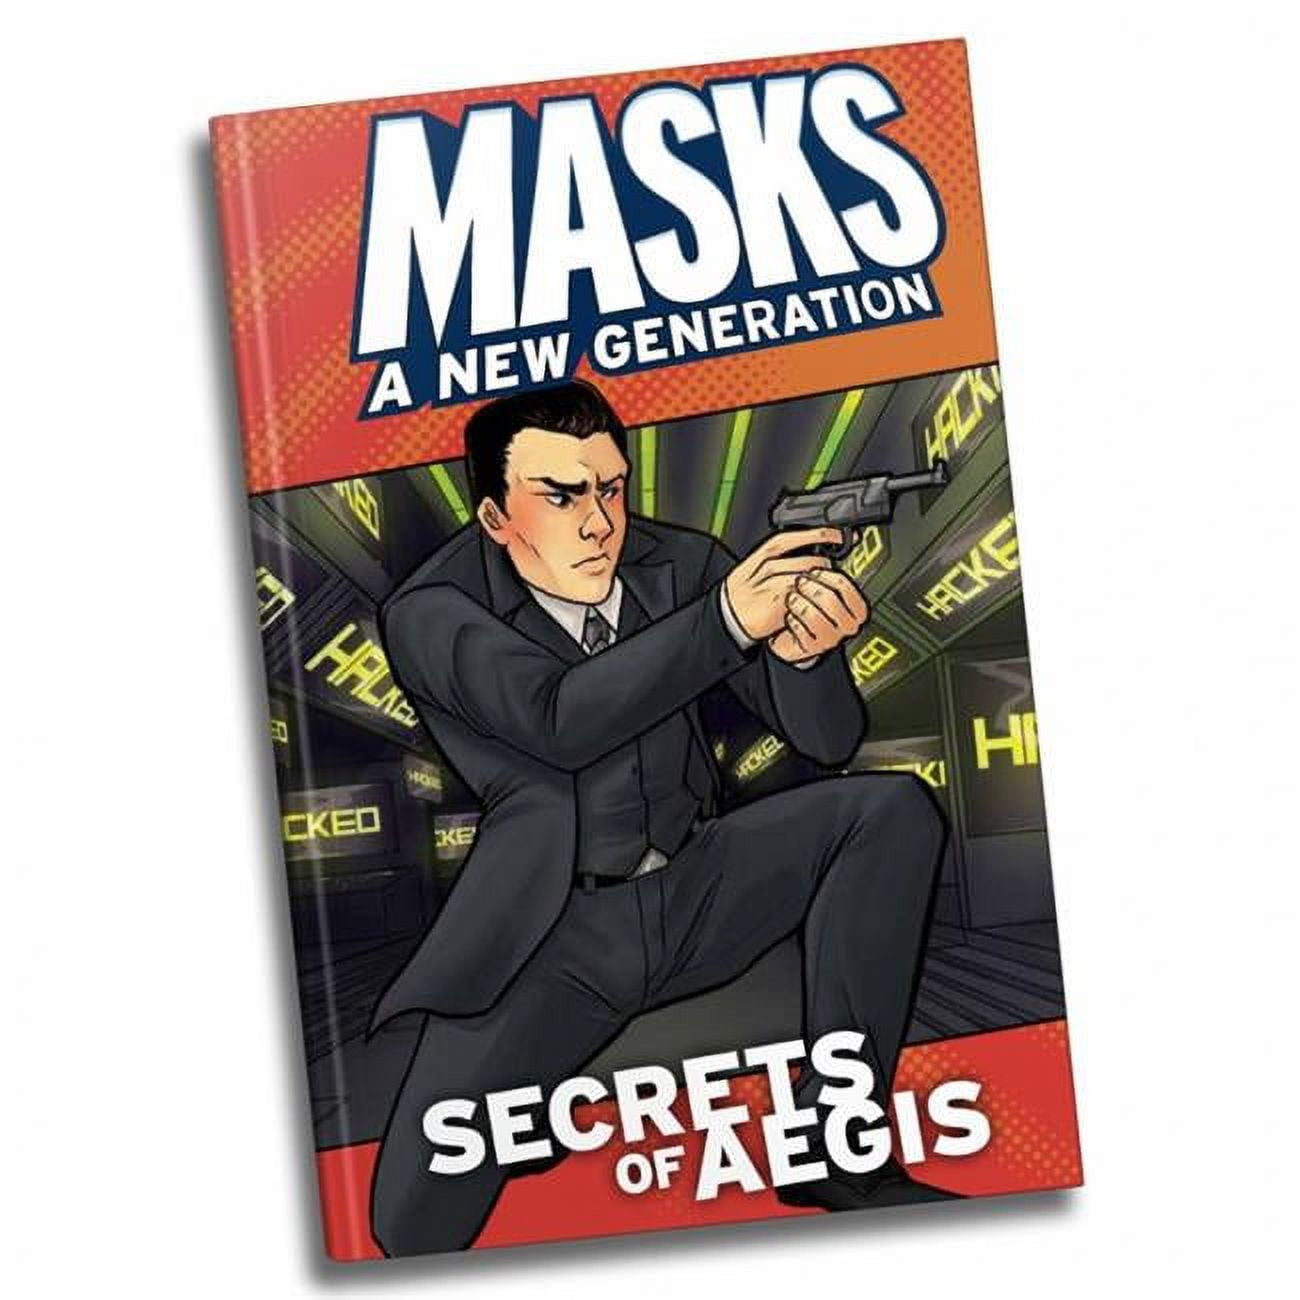 ISBN 9781987916683 product image for MAE021SC Masks Secrets of A.E.G.I.S. SC Role Playing Games | upcitemdb.com